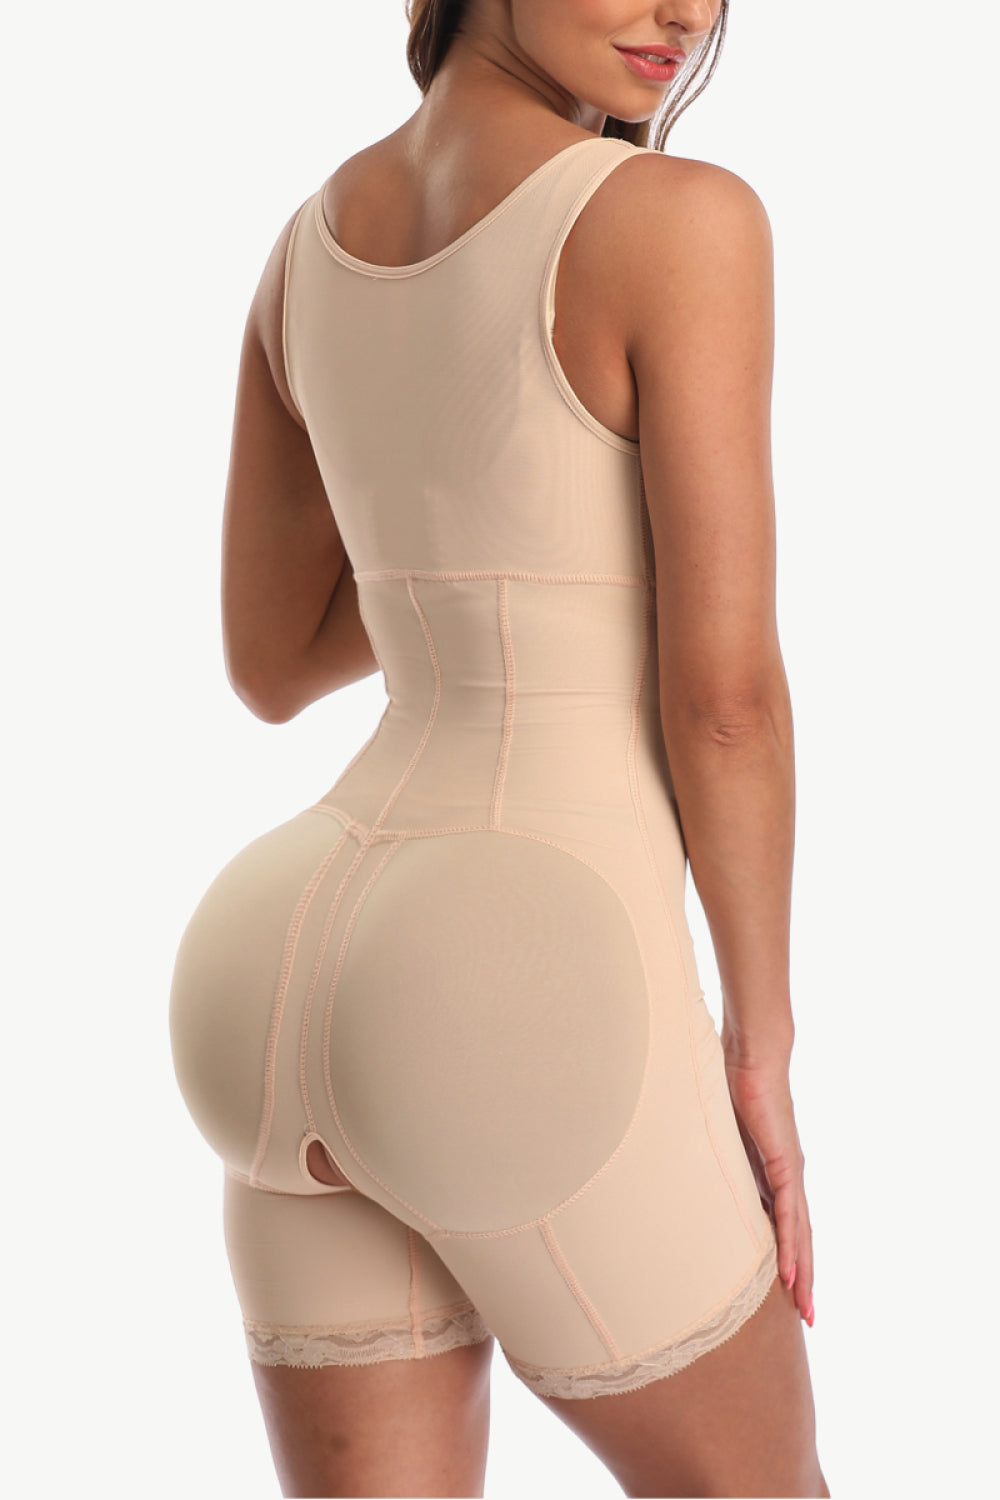 Full Size Zip-Up Lace Detail Shapewear Print on any thing USA/STOD clothes